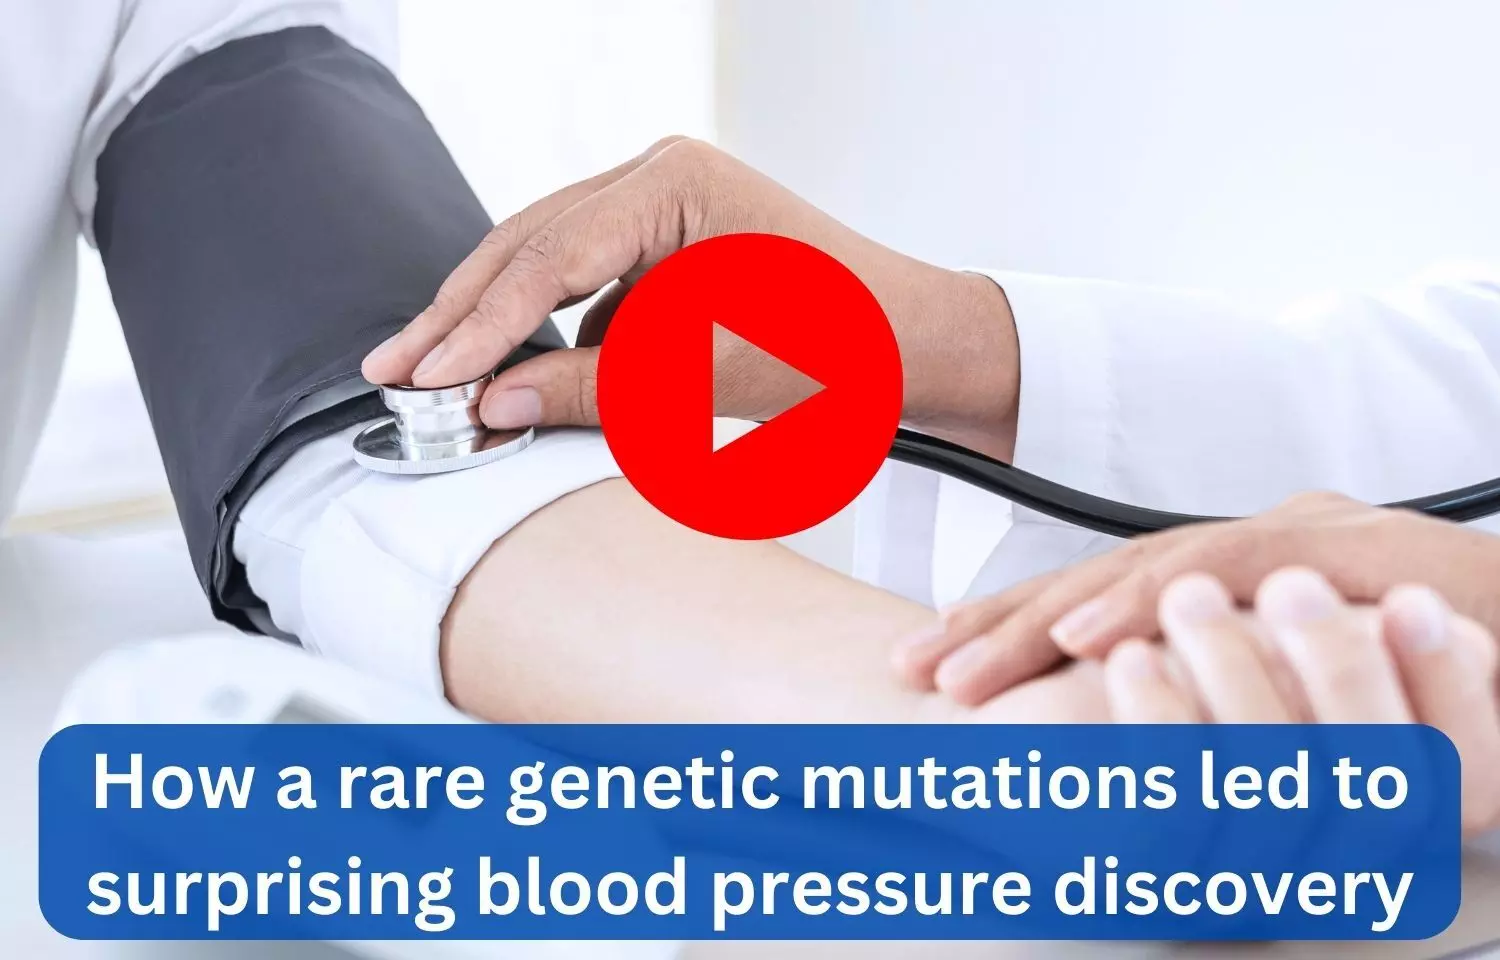 How a rare genetic mutations led to surprising blood pressure discovery